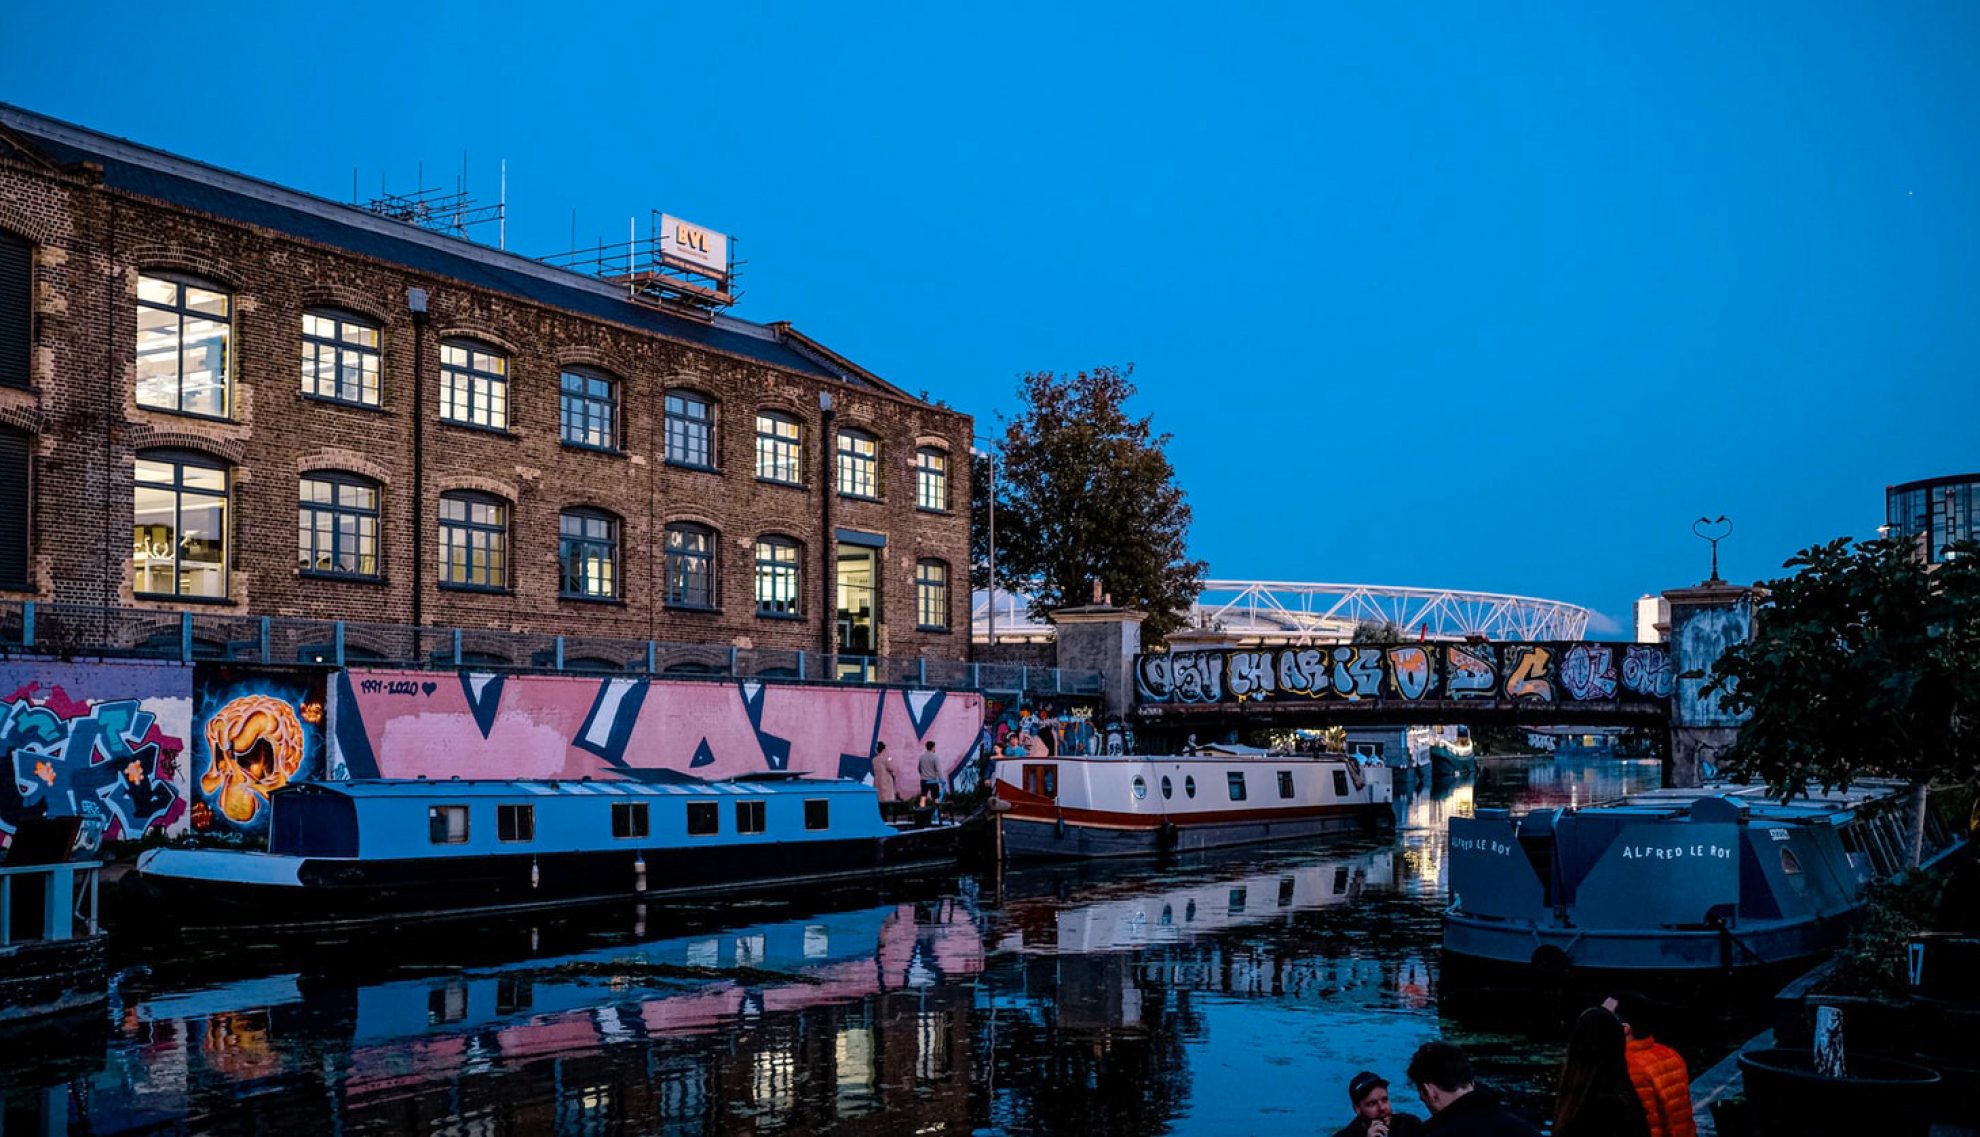 Queen's Yard and canal boats in Hackney Wick, London